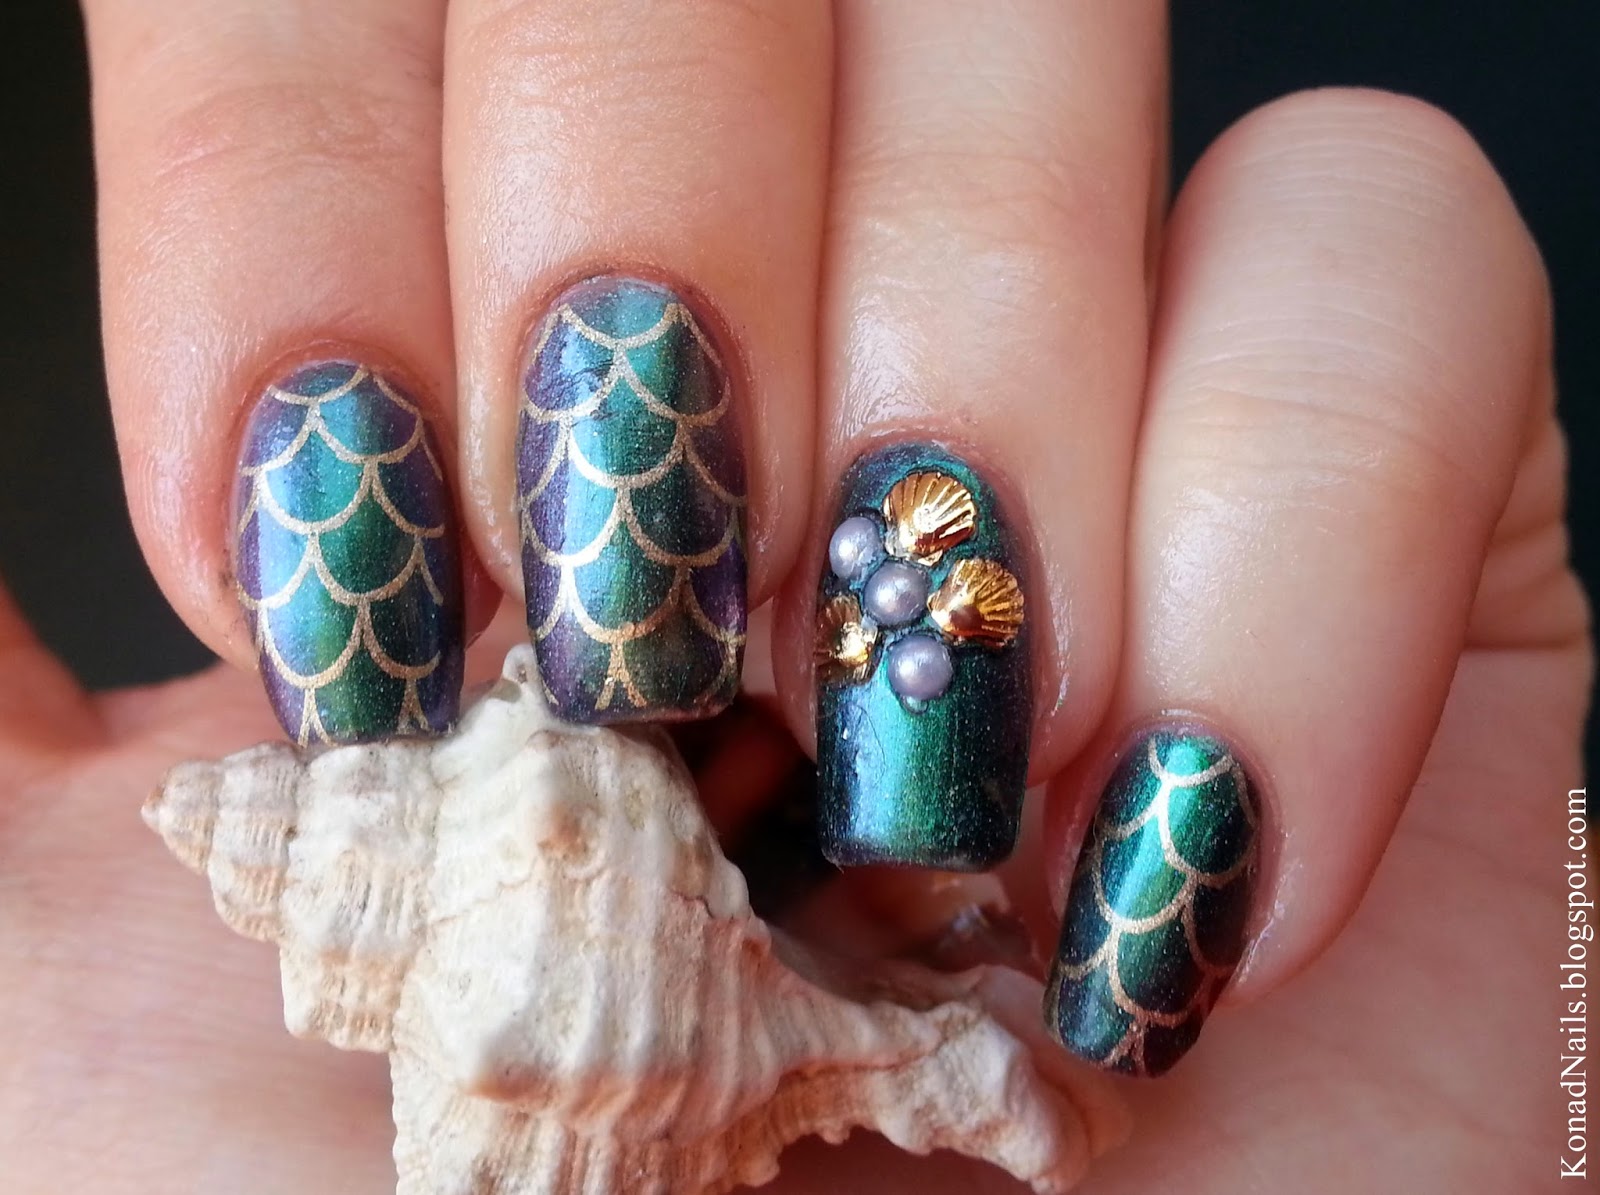 Mermaid Nail Design Ideas for Short Nails - wide 8